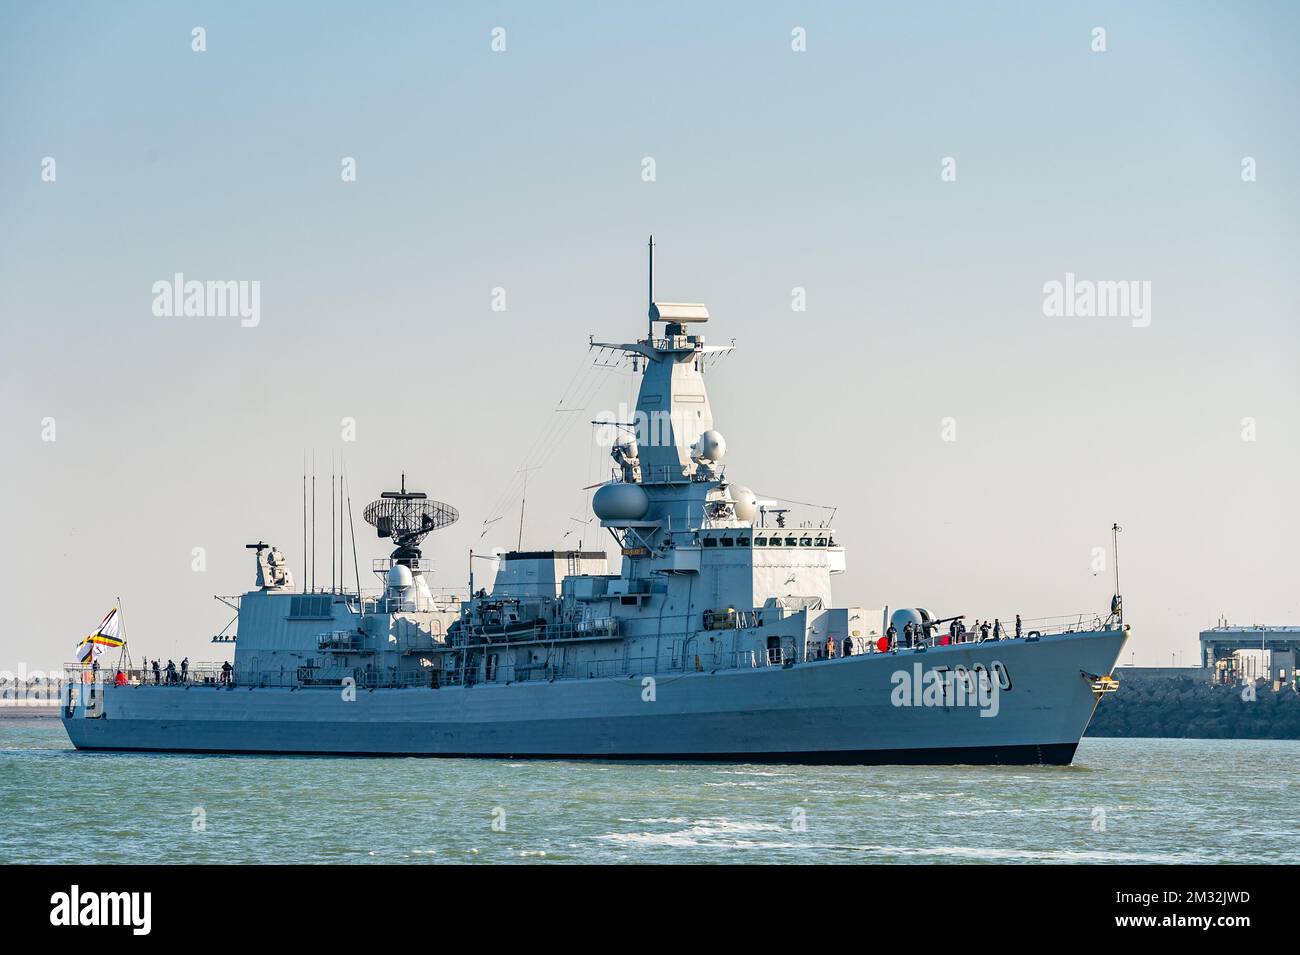 ATTENTION EDITORS - HAND OUT PICTURES - EDITORIAL USE ONLY - MANDATORY CREDIT HANDOUT DEFENSIE - DEFENCE TBN JORN URBAIN Illustration picture shows the arrival of Belgian frigate Leopold 1 in Zeebrugge, Friday 27 March 2020. One of the sailors on the frigate has a confirmed Corona virus infection and has left the ship earlier. Due to the strict measures following such an infection, the ship has returned earlier from its mission and all non-infected sailors must now stay in home quarantine. BELGA PHOTO HANDOUT DEFENSIE - DEFENCE TBN JORN URBAIN  Stock Photo